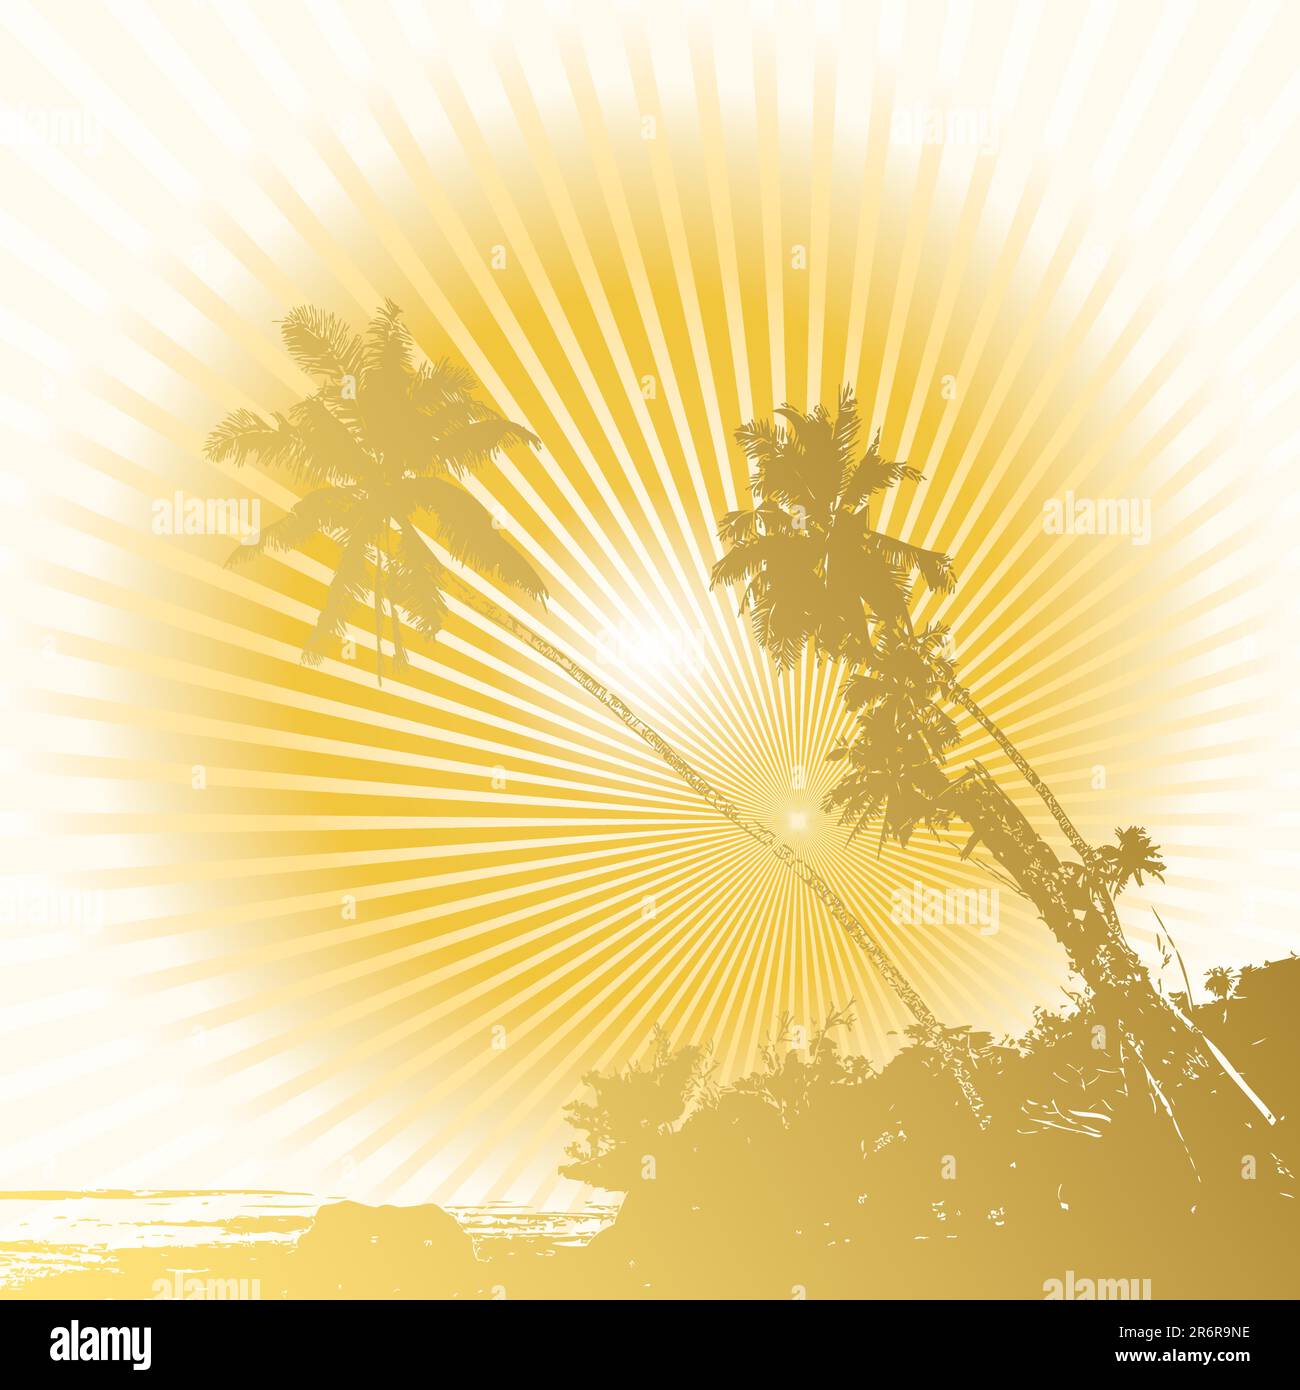 vector image of palm trees in the sun Stock Vector